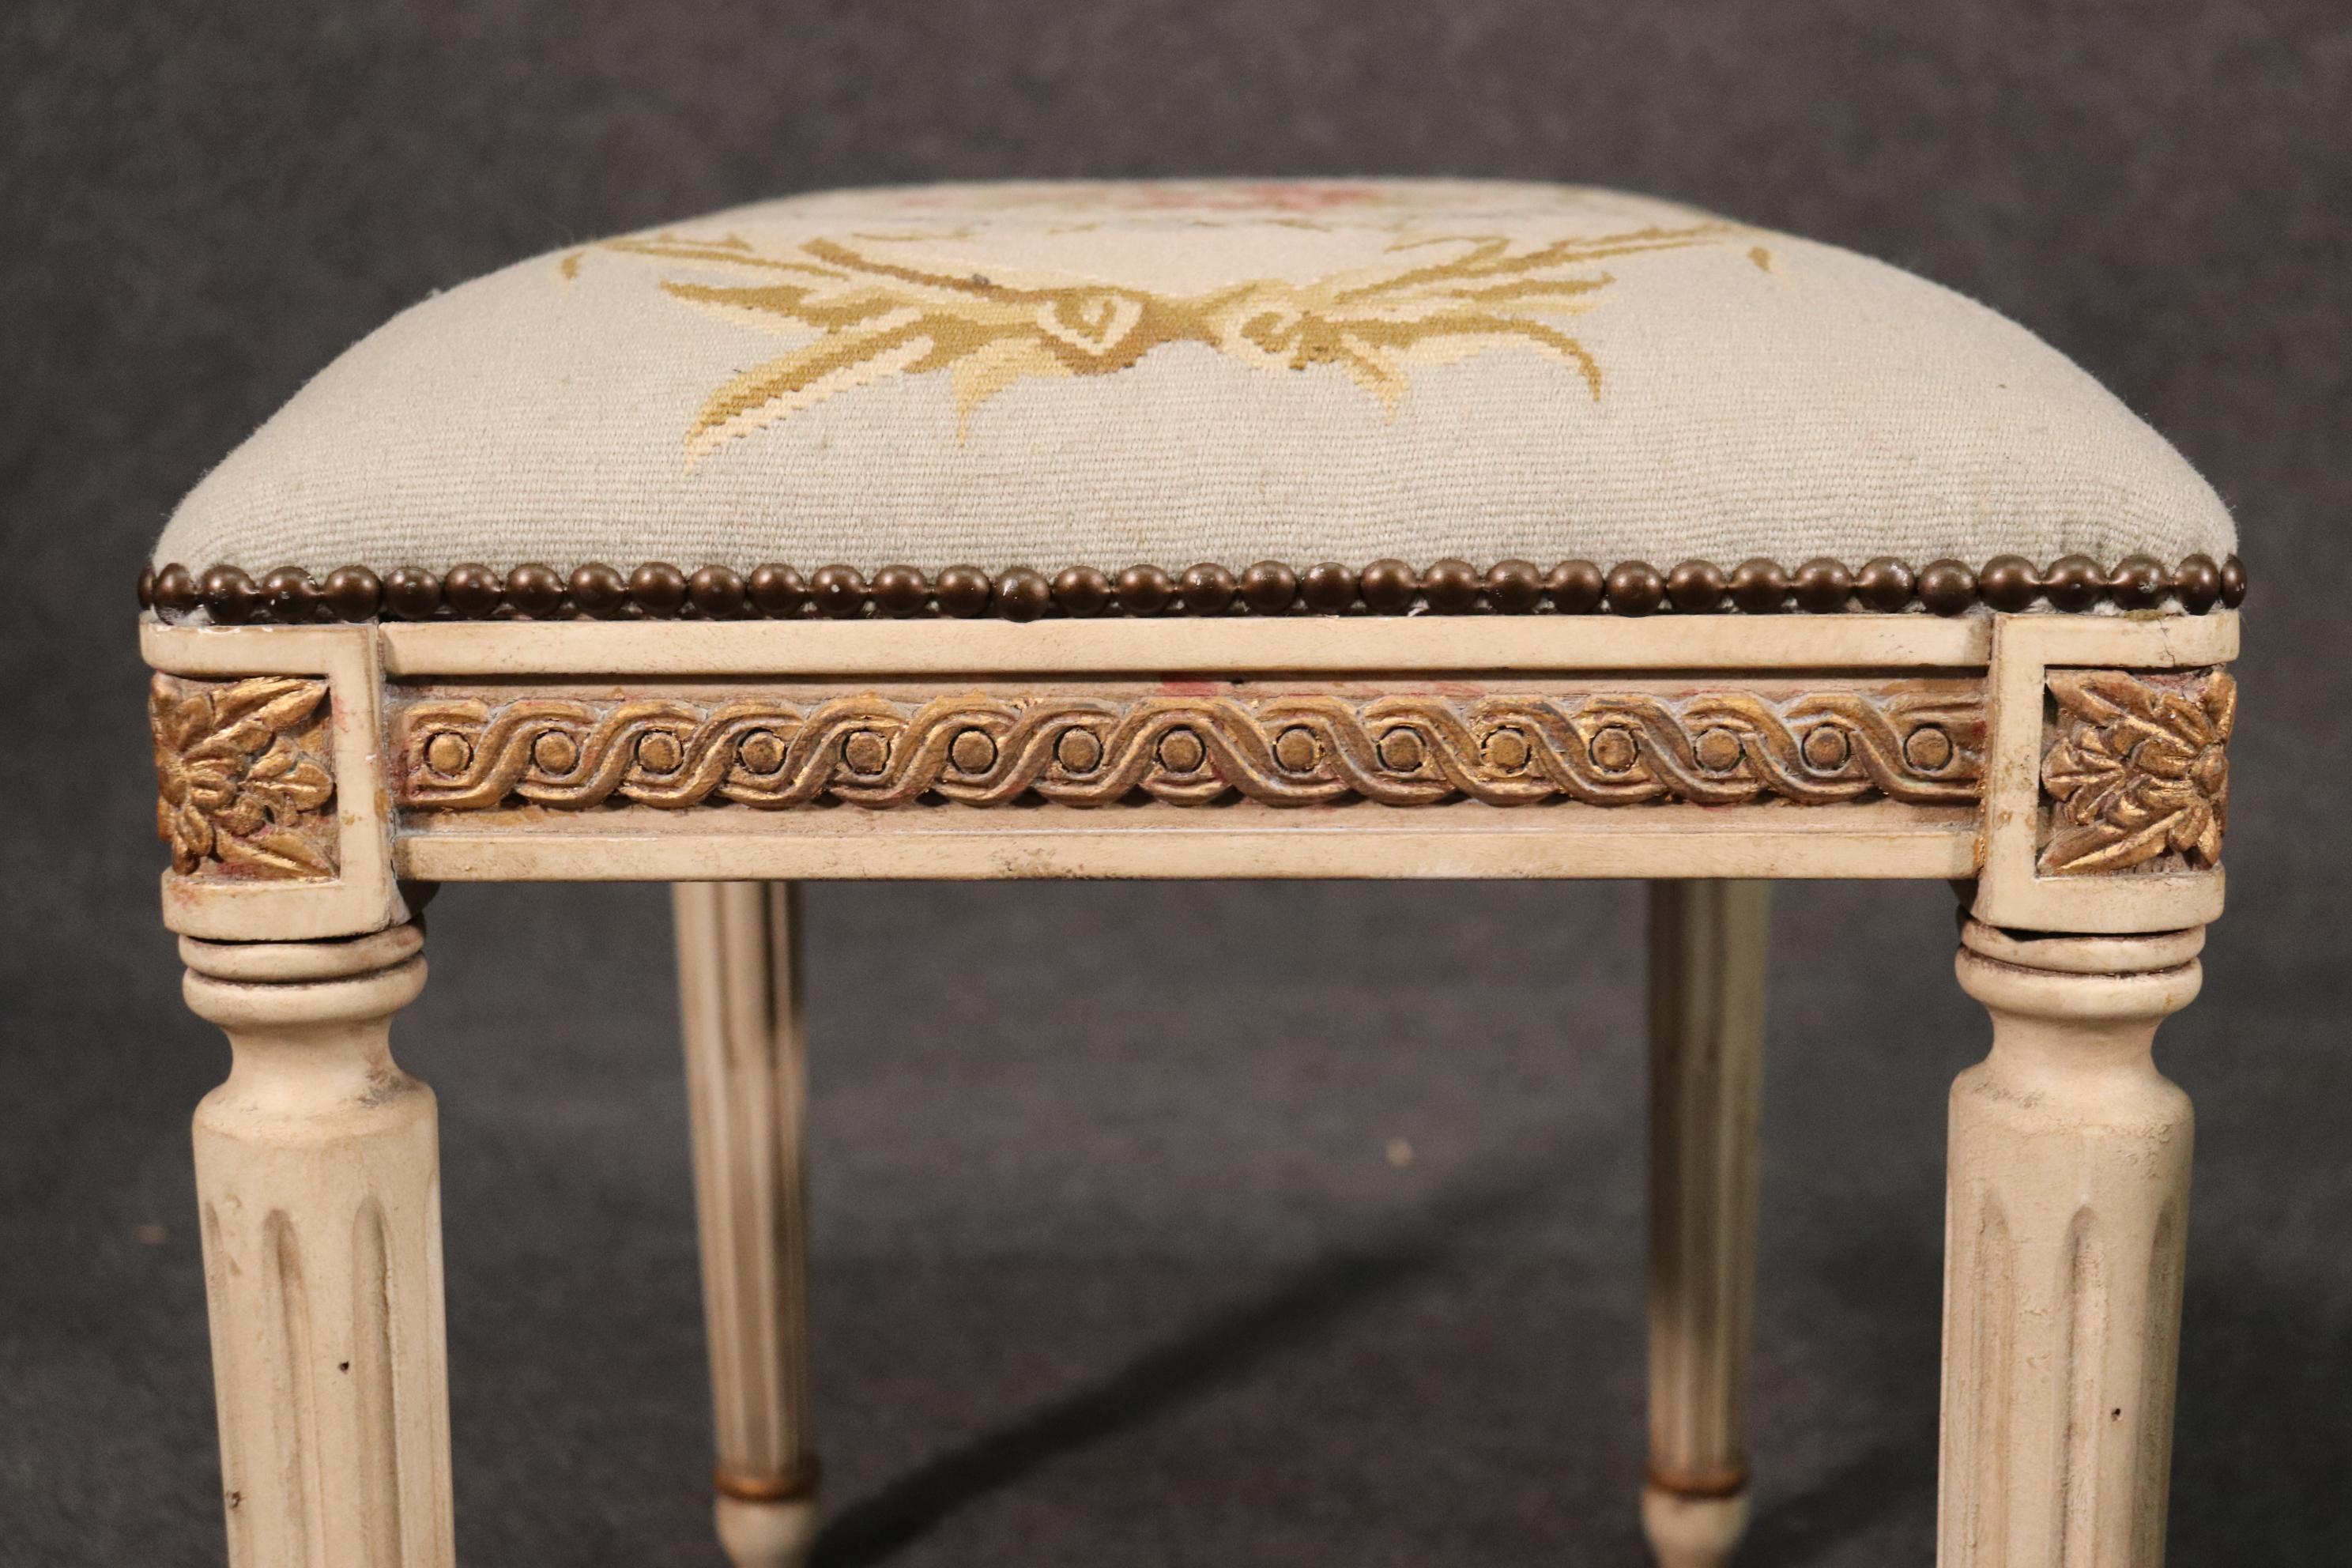 This is a gorgeous pair of stools. Look at the carved details, gold leafing and crème painted frames. The Aubusson style needlepoint looks great too. They each measure 20 tall x 23 wide x 15 deep.